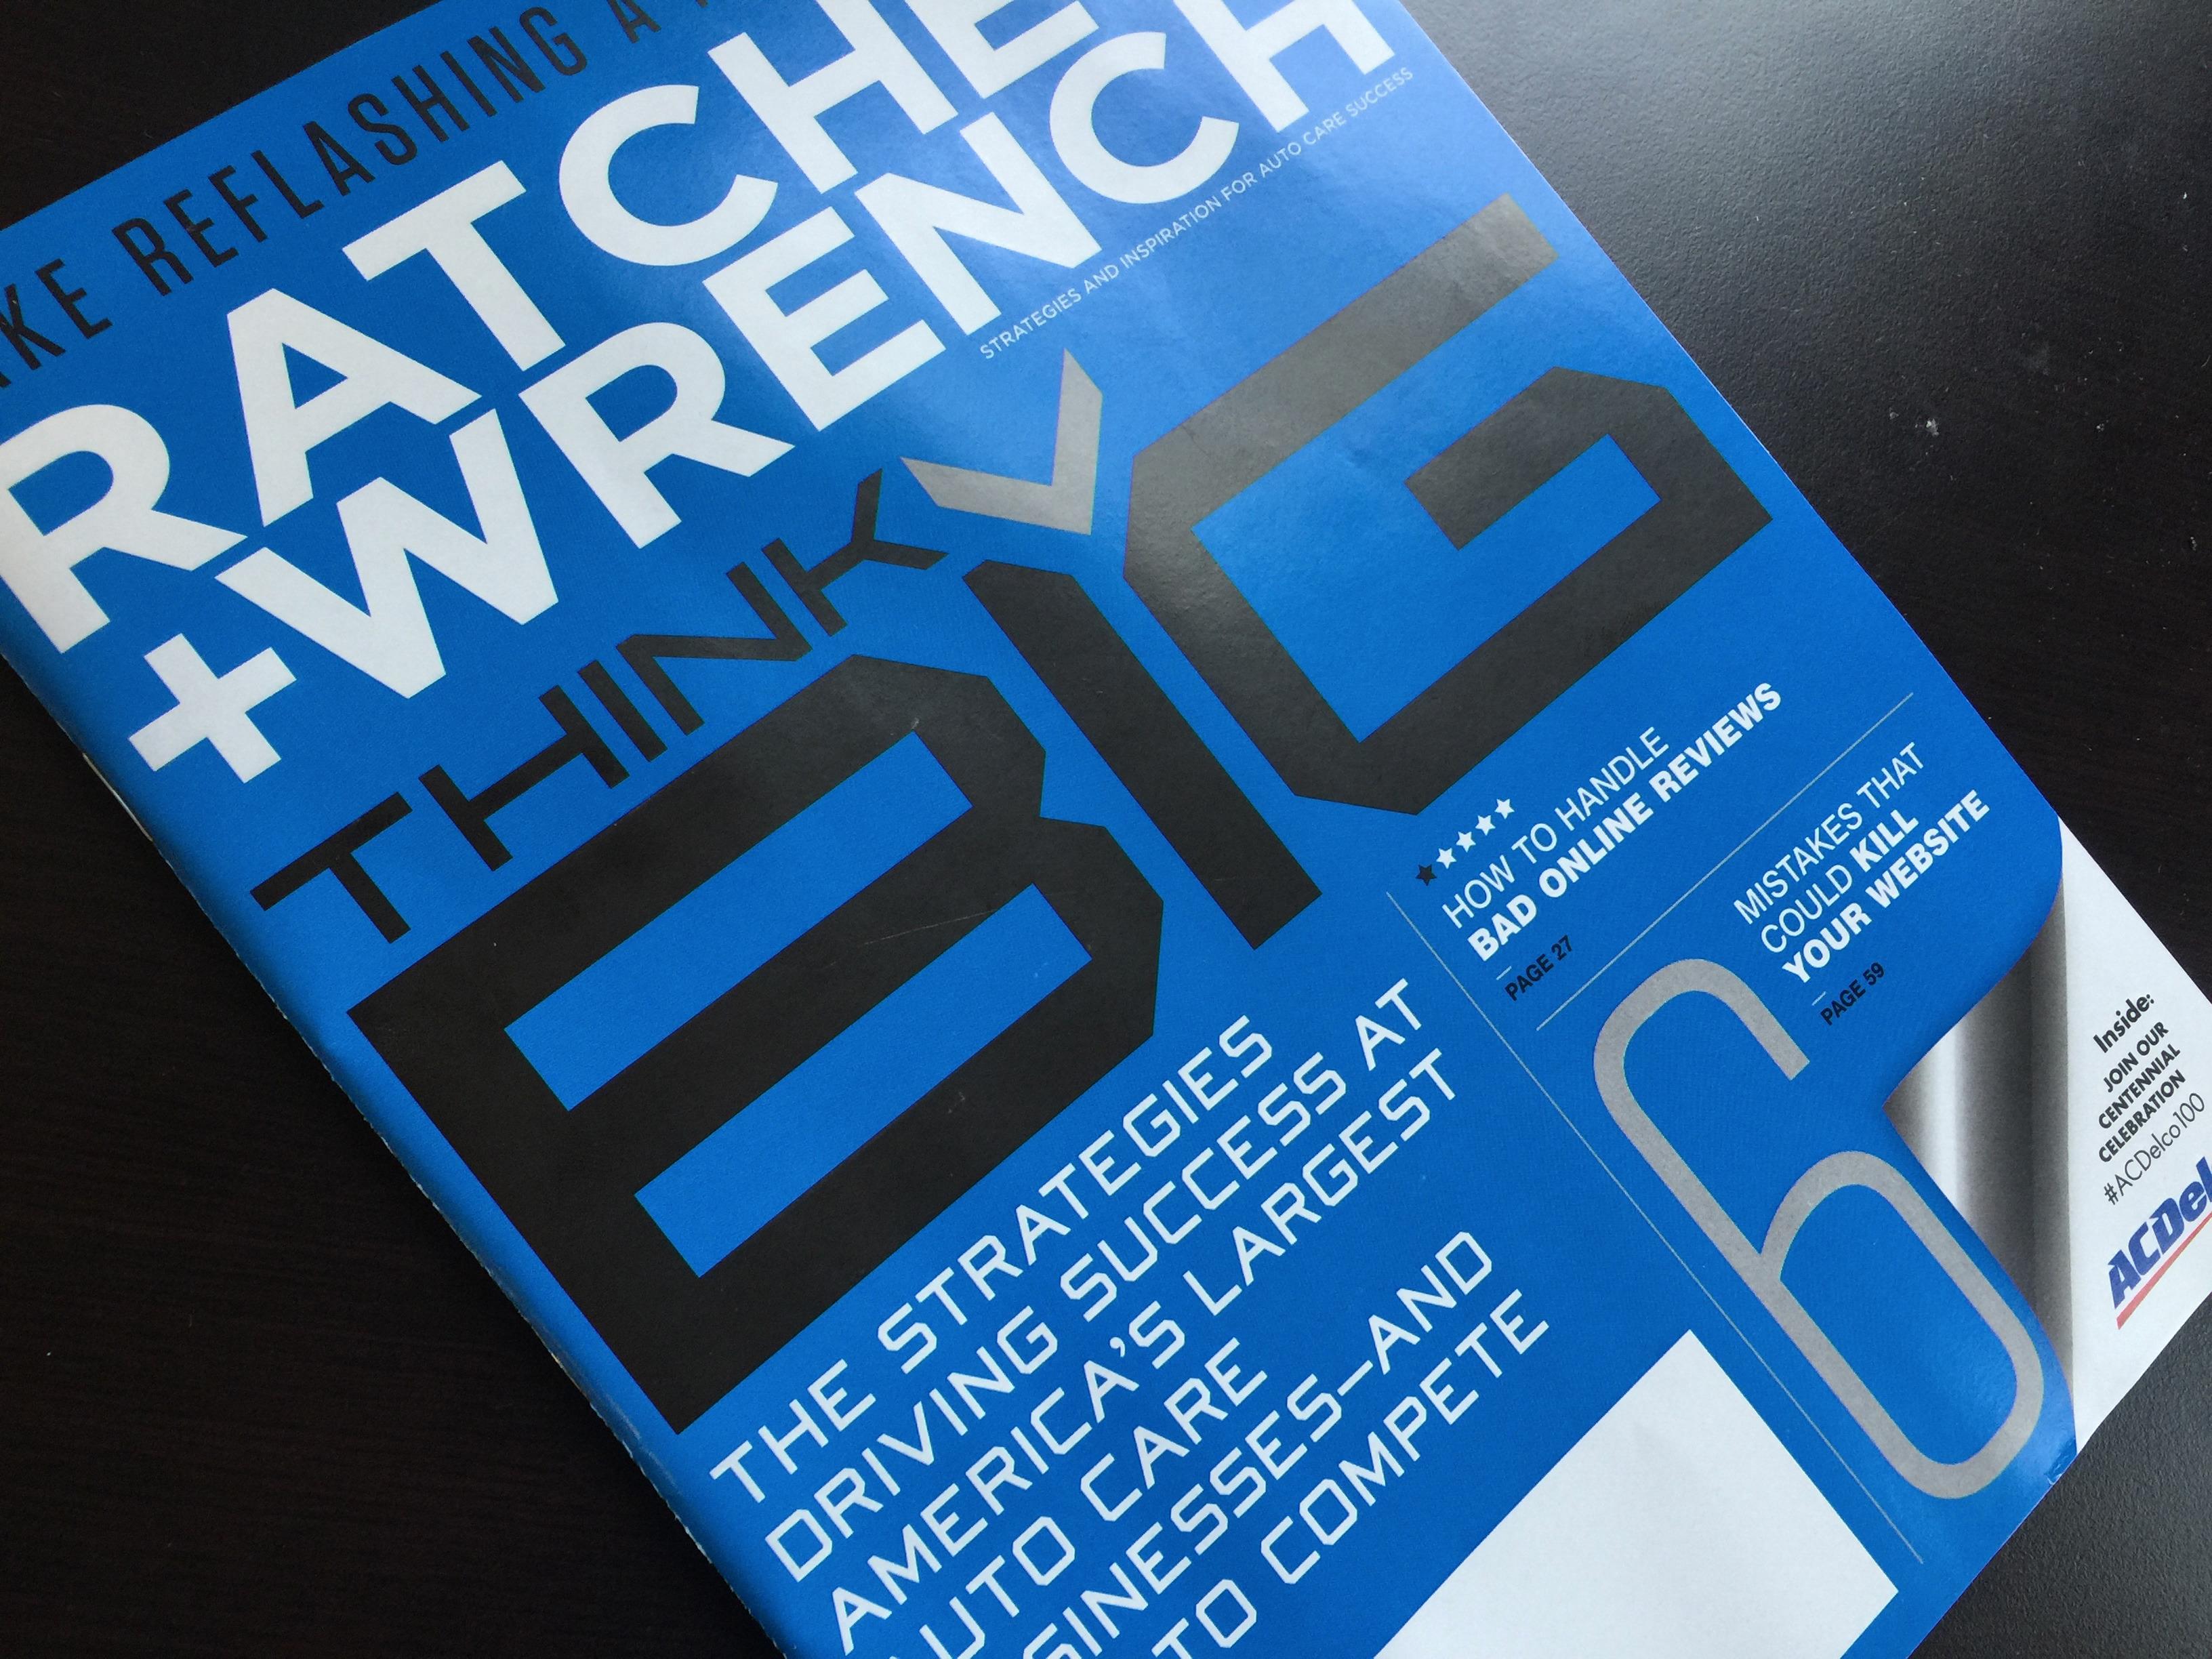 Complete Marketing Resources was featured in the May 2016 Ratchet & Wrench Think Big Edition with 6 Website Tips for Shops.